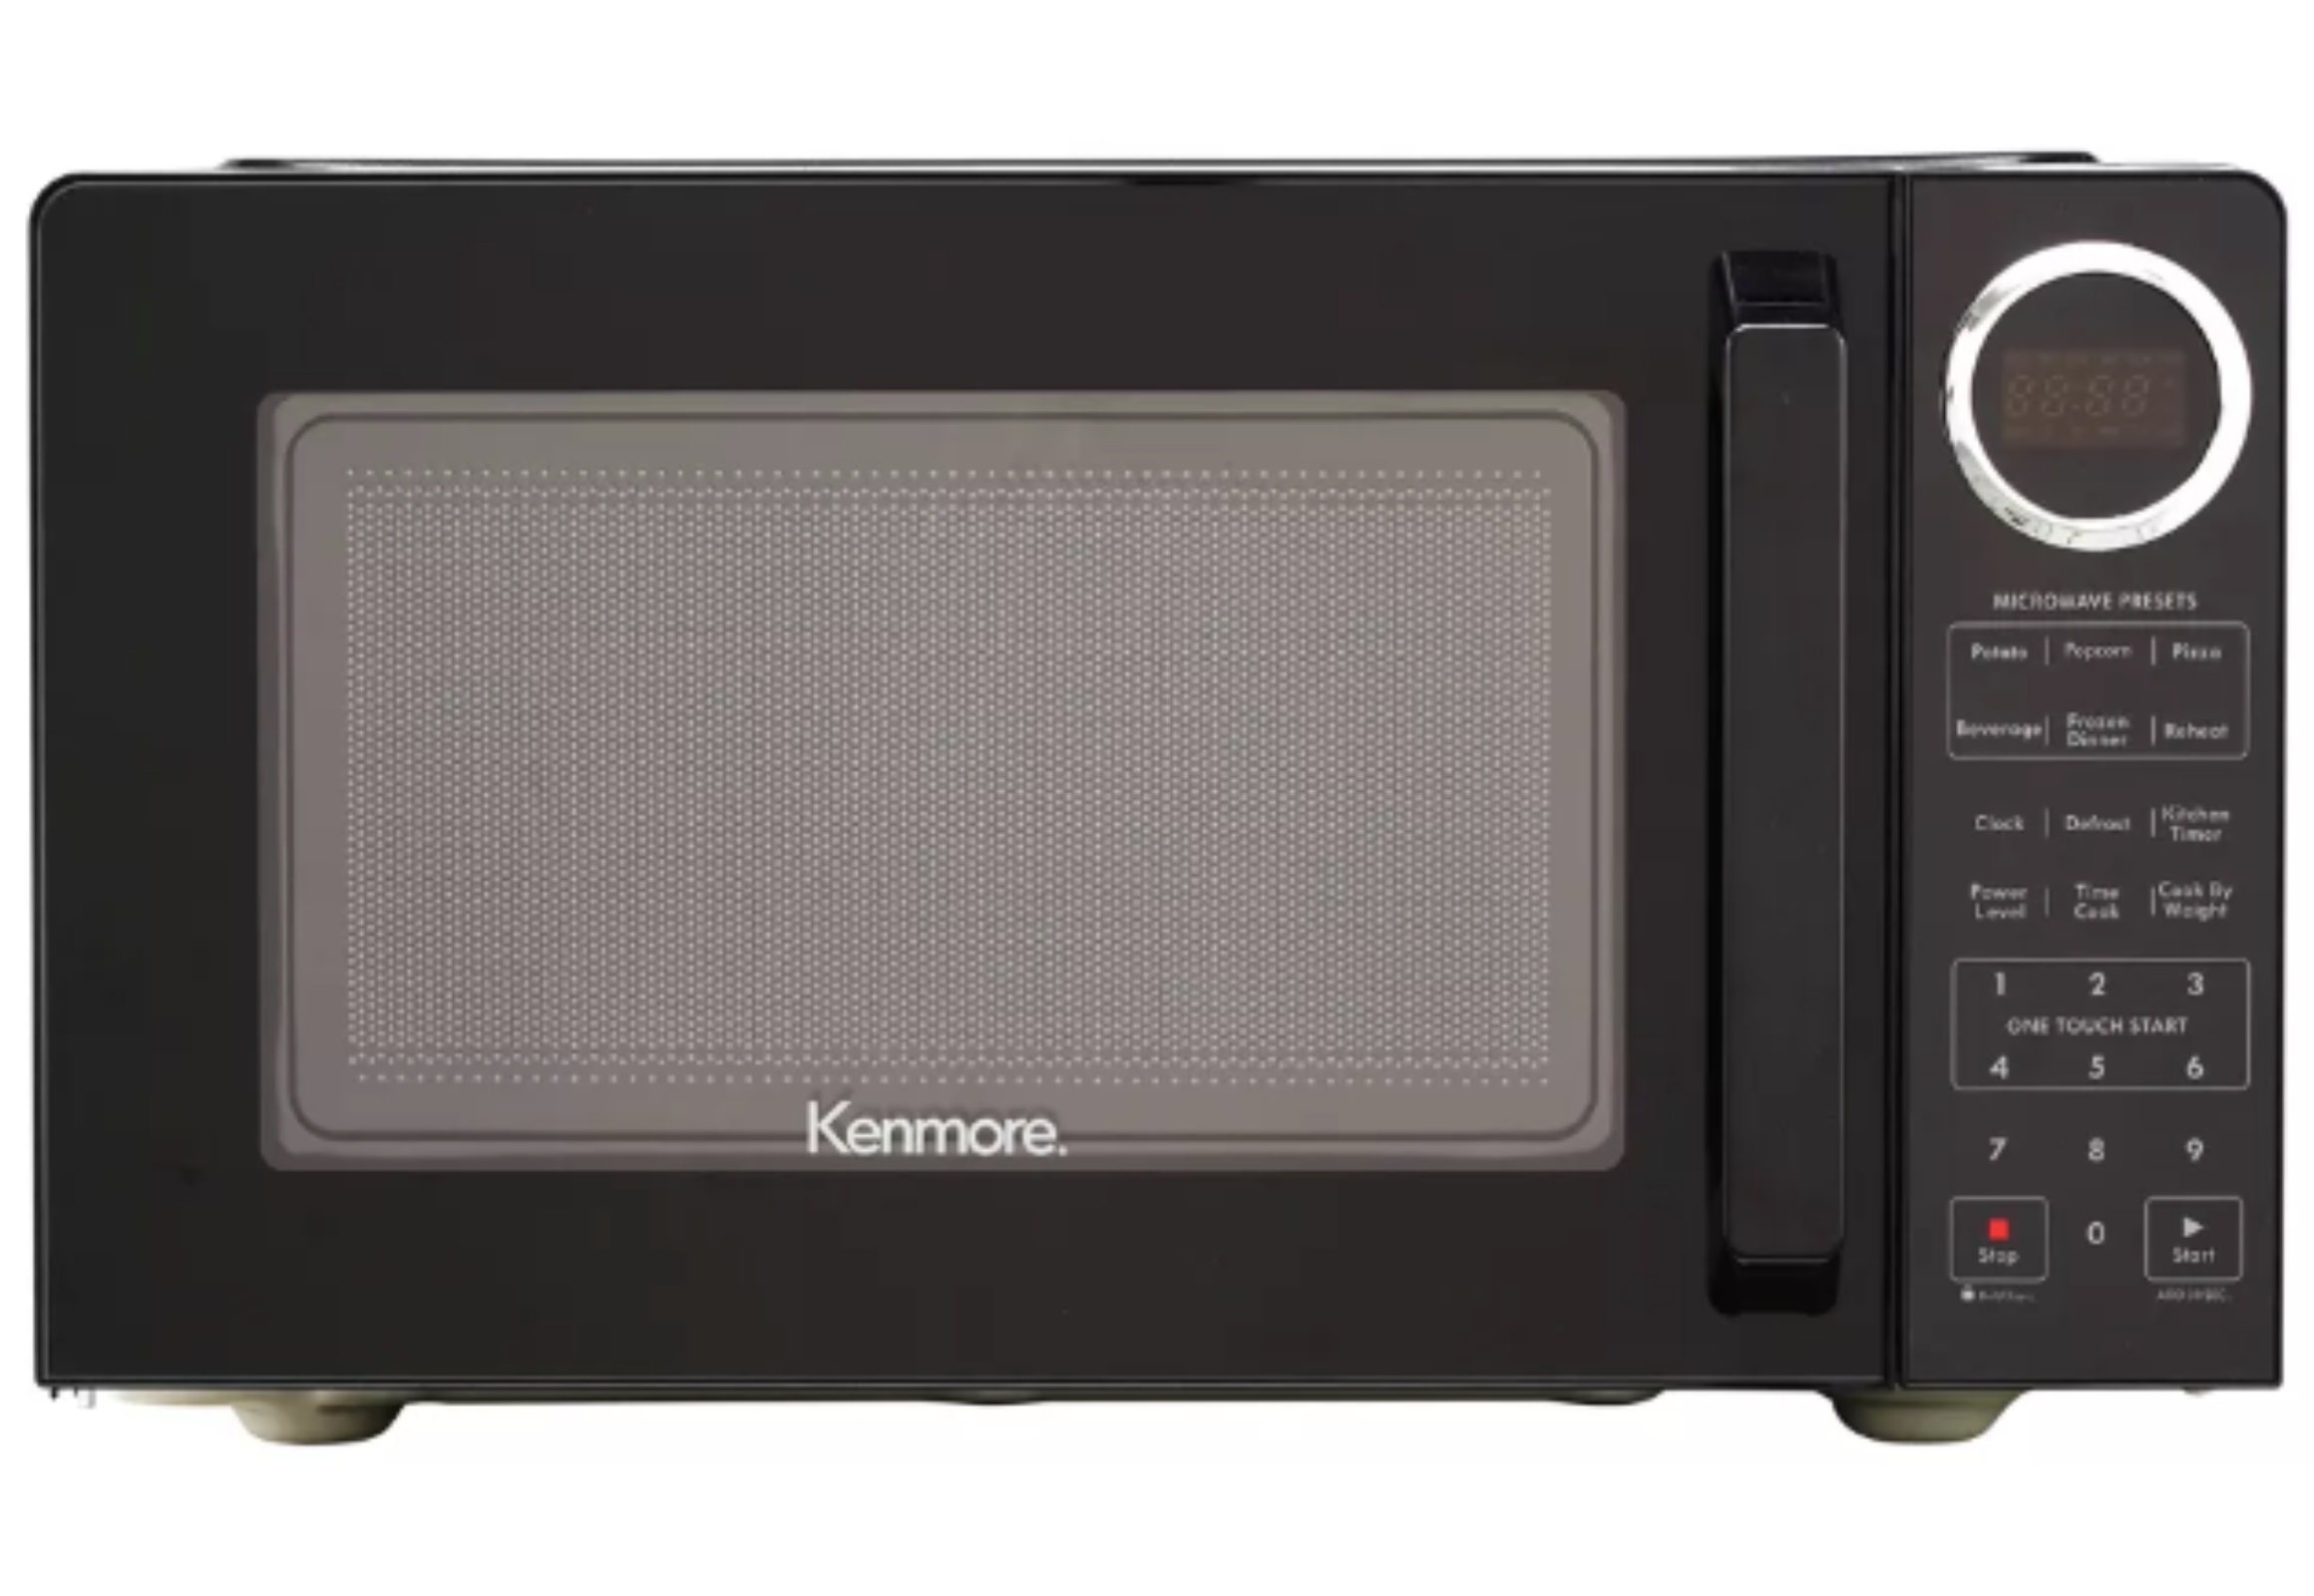 Kenmore 0.9-Cubic Foot Microwave Oven